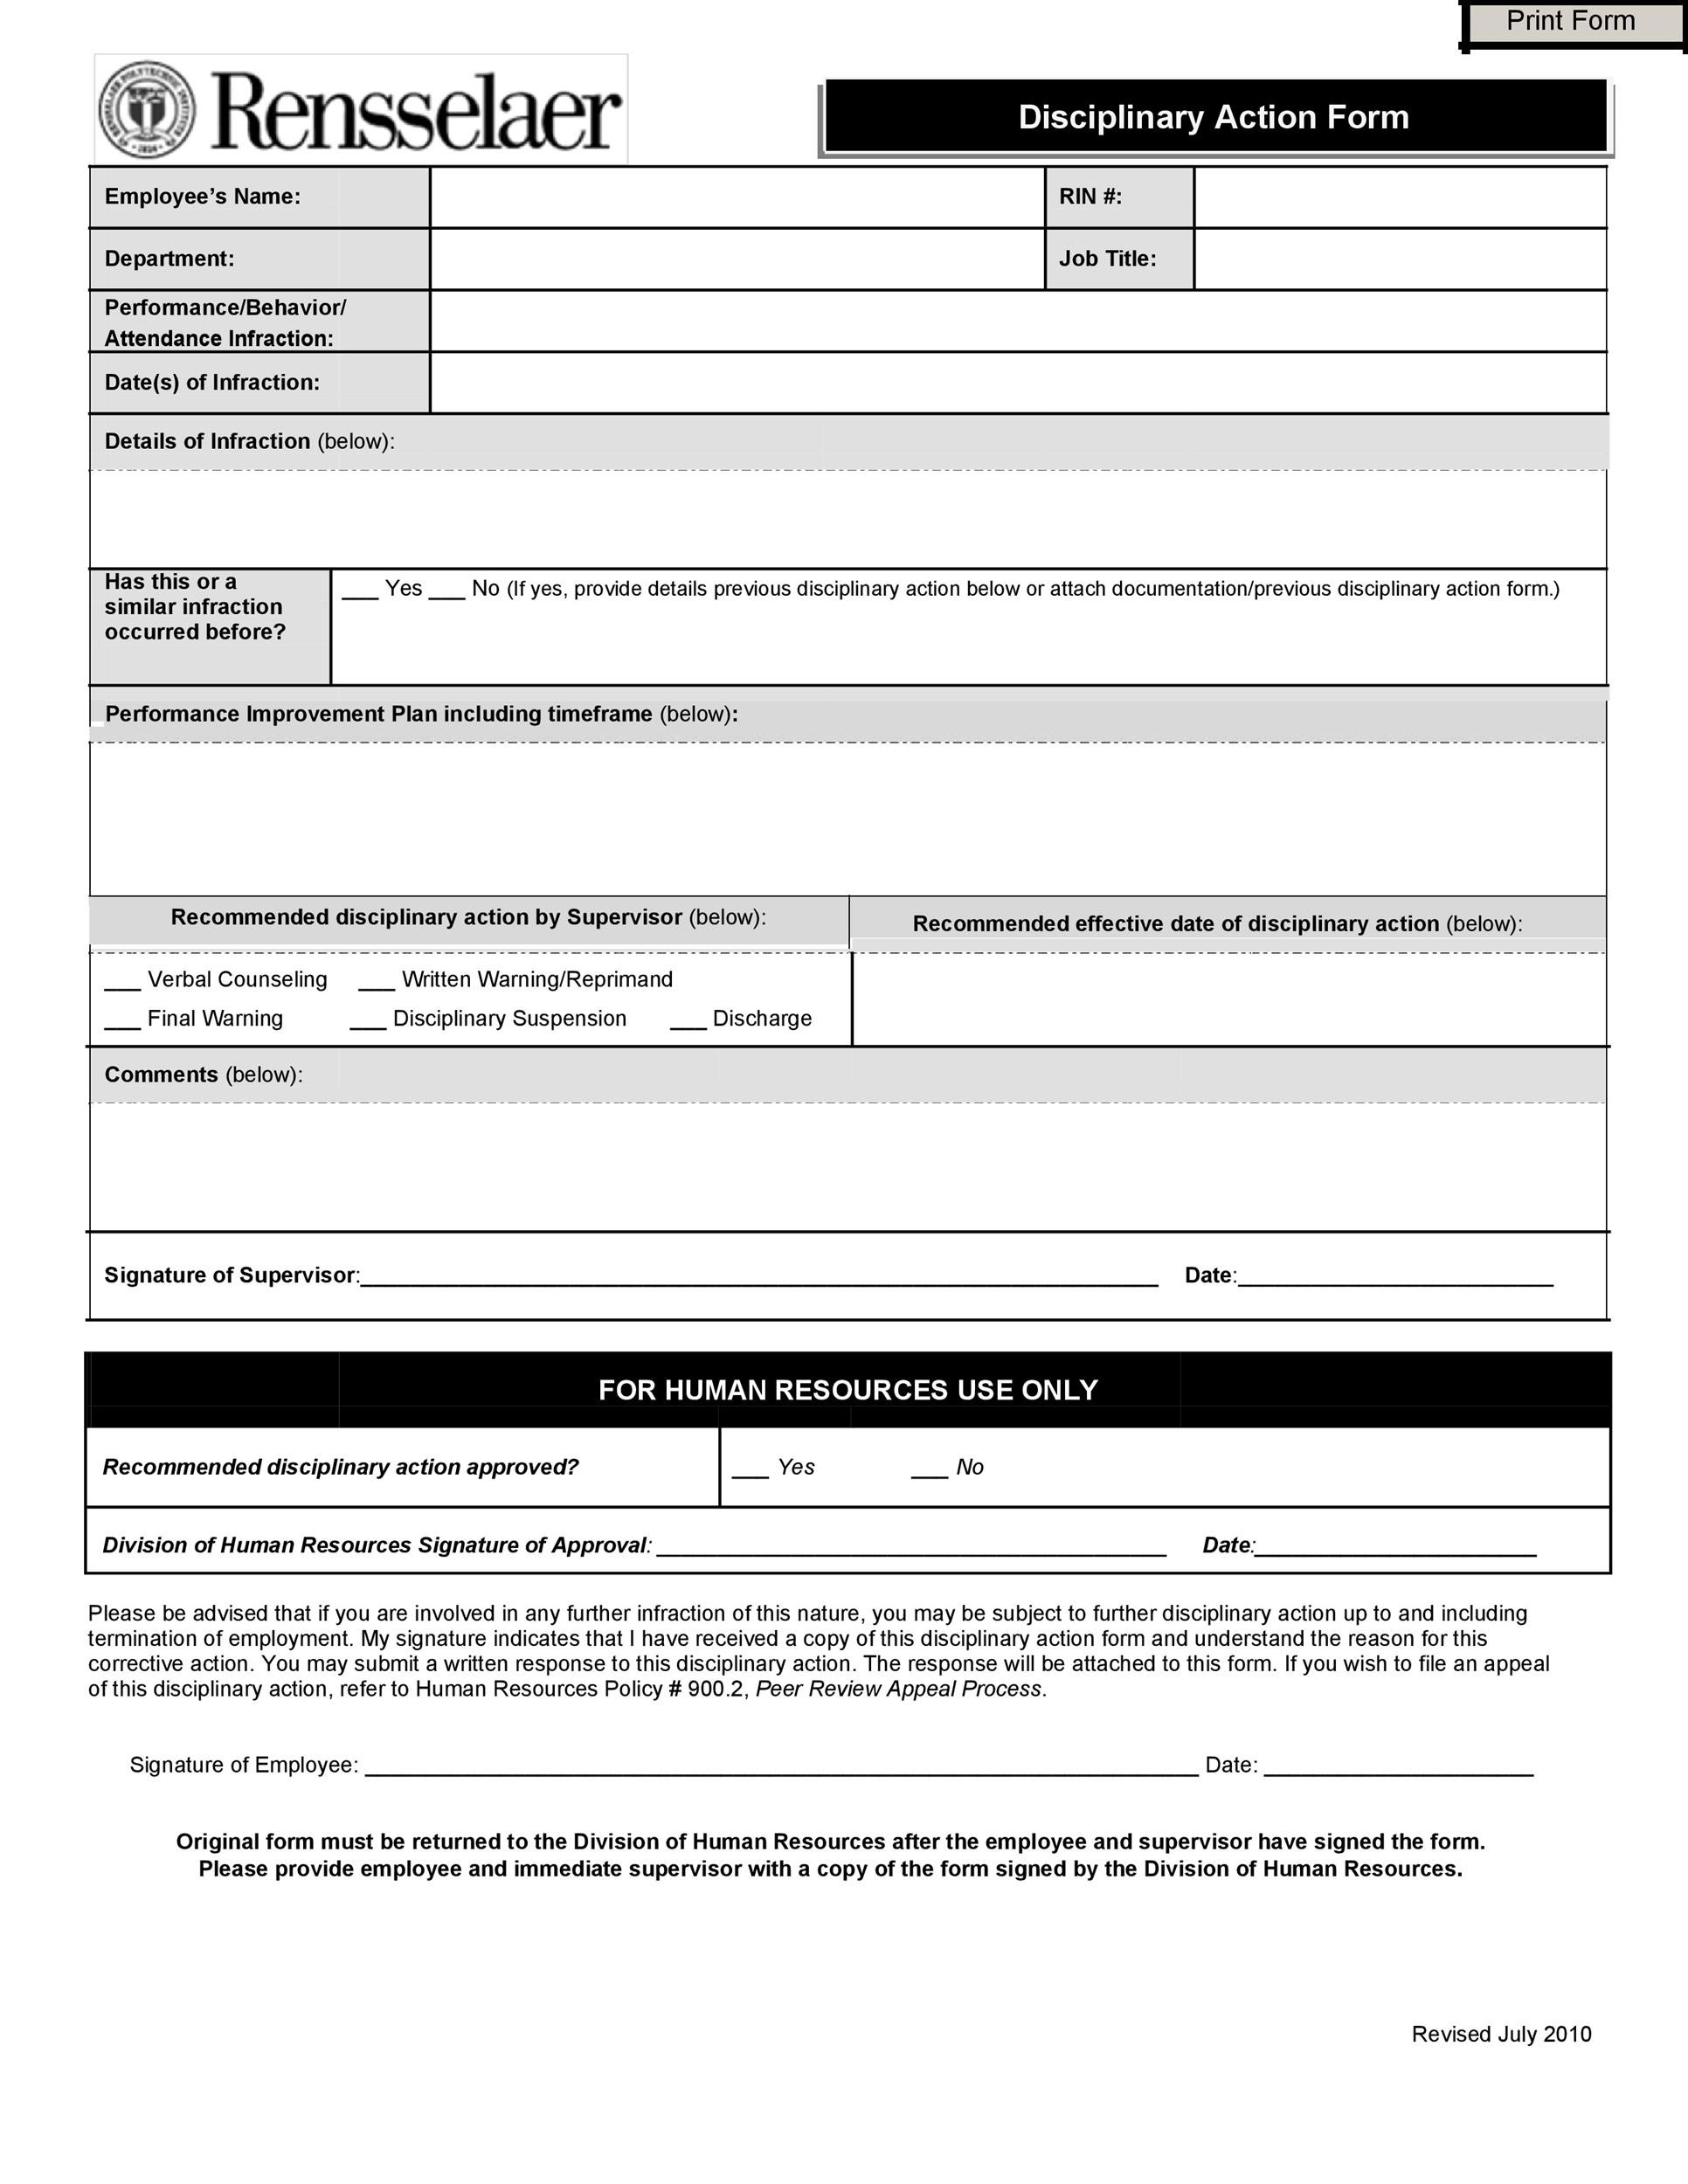 free-printable-disciplinary-action-form-printable-forms-free-online